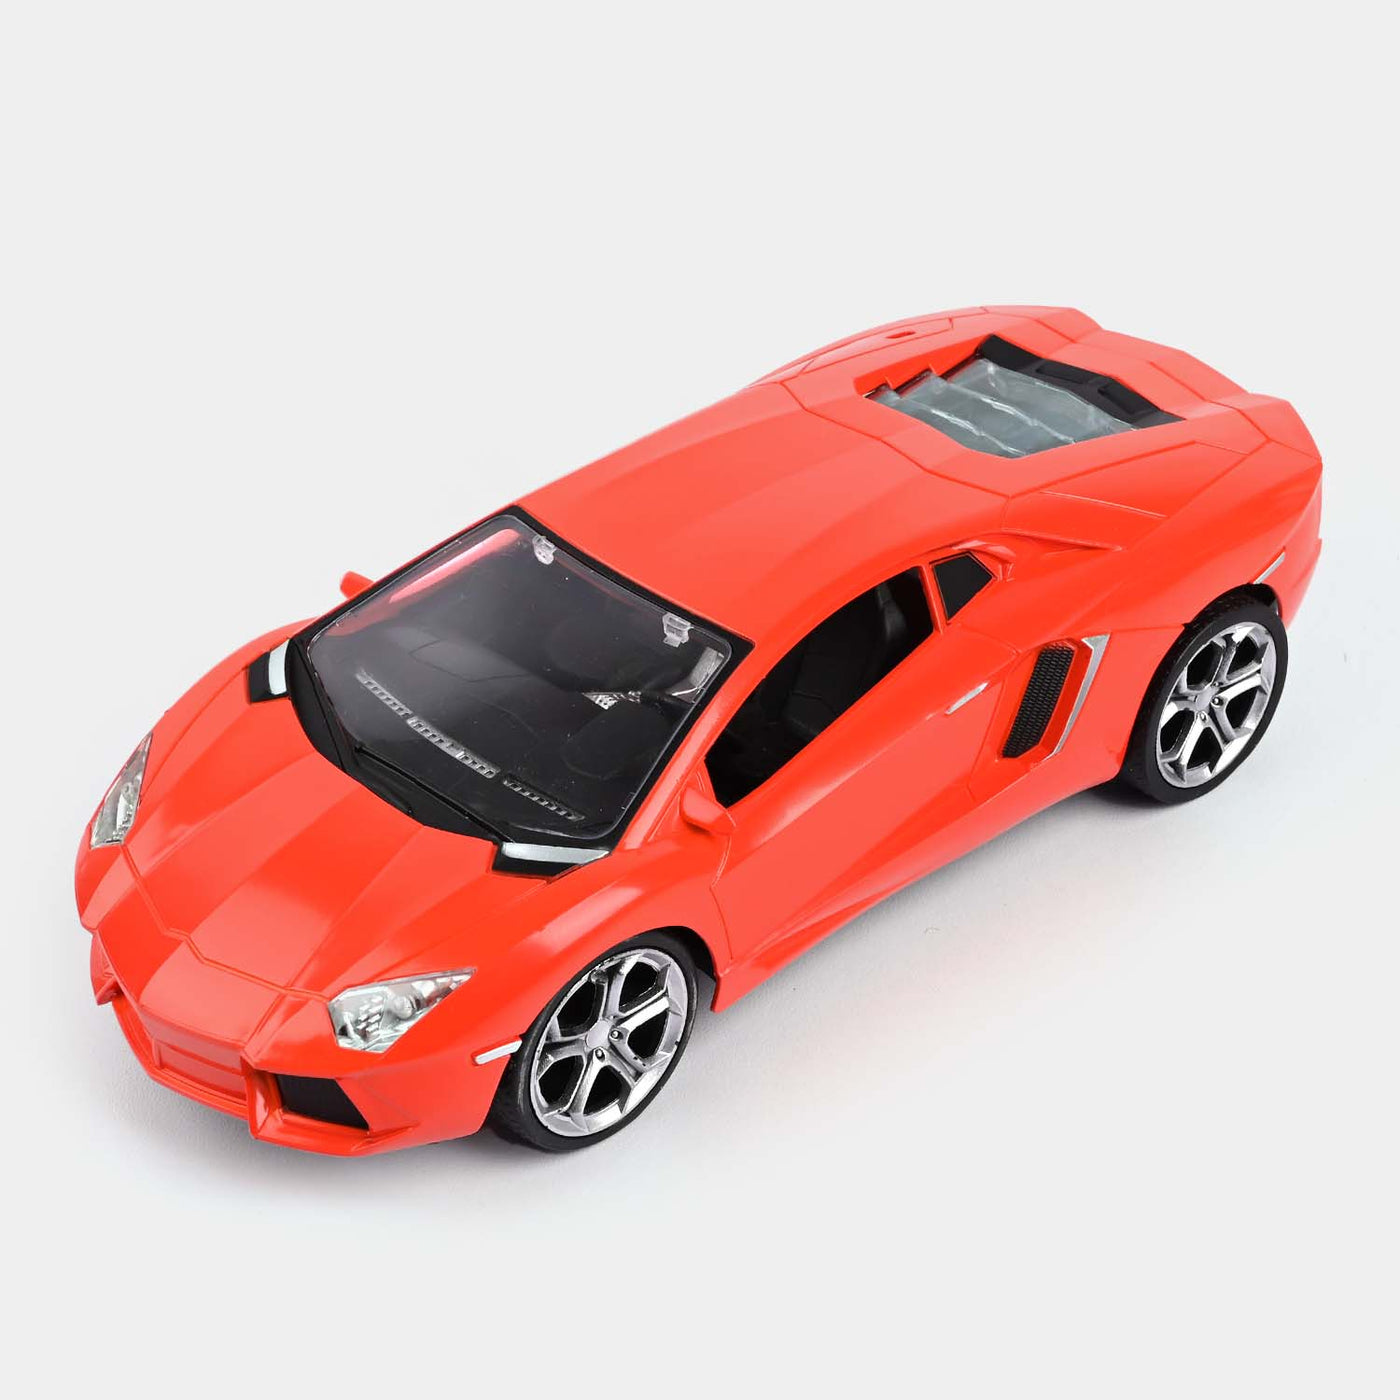 Remote Control 4 Function Car With Light For Kids